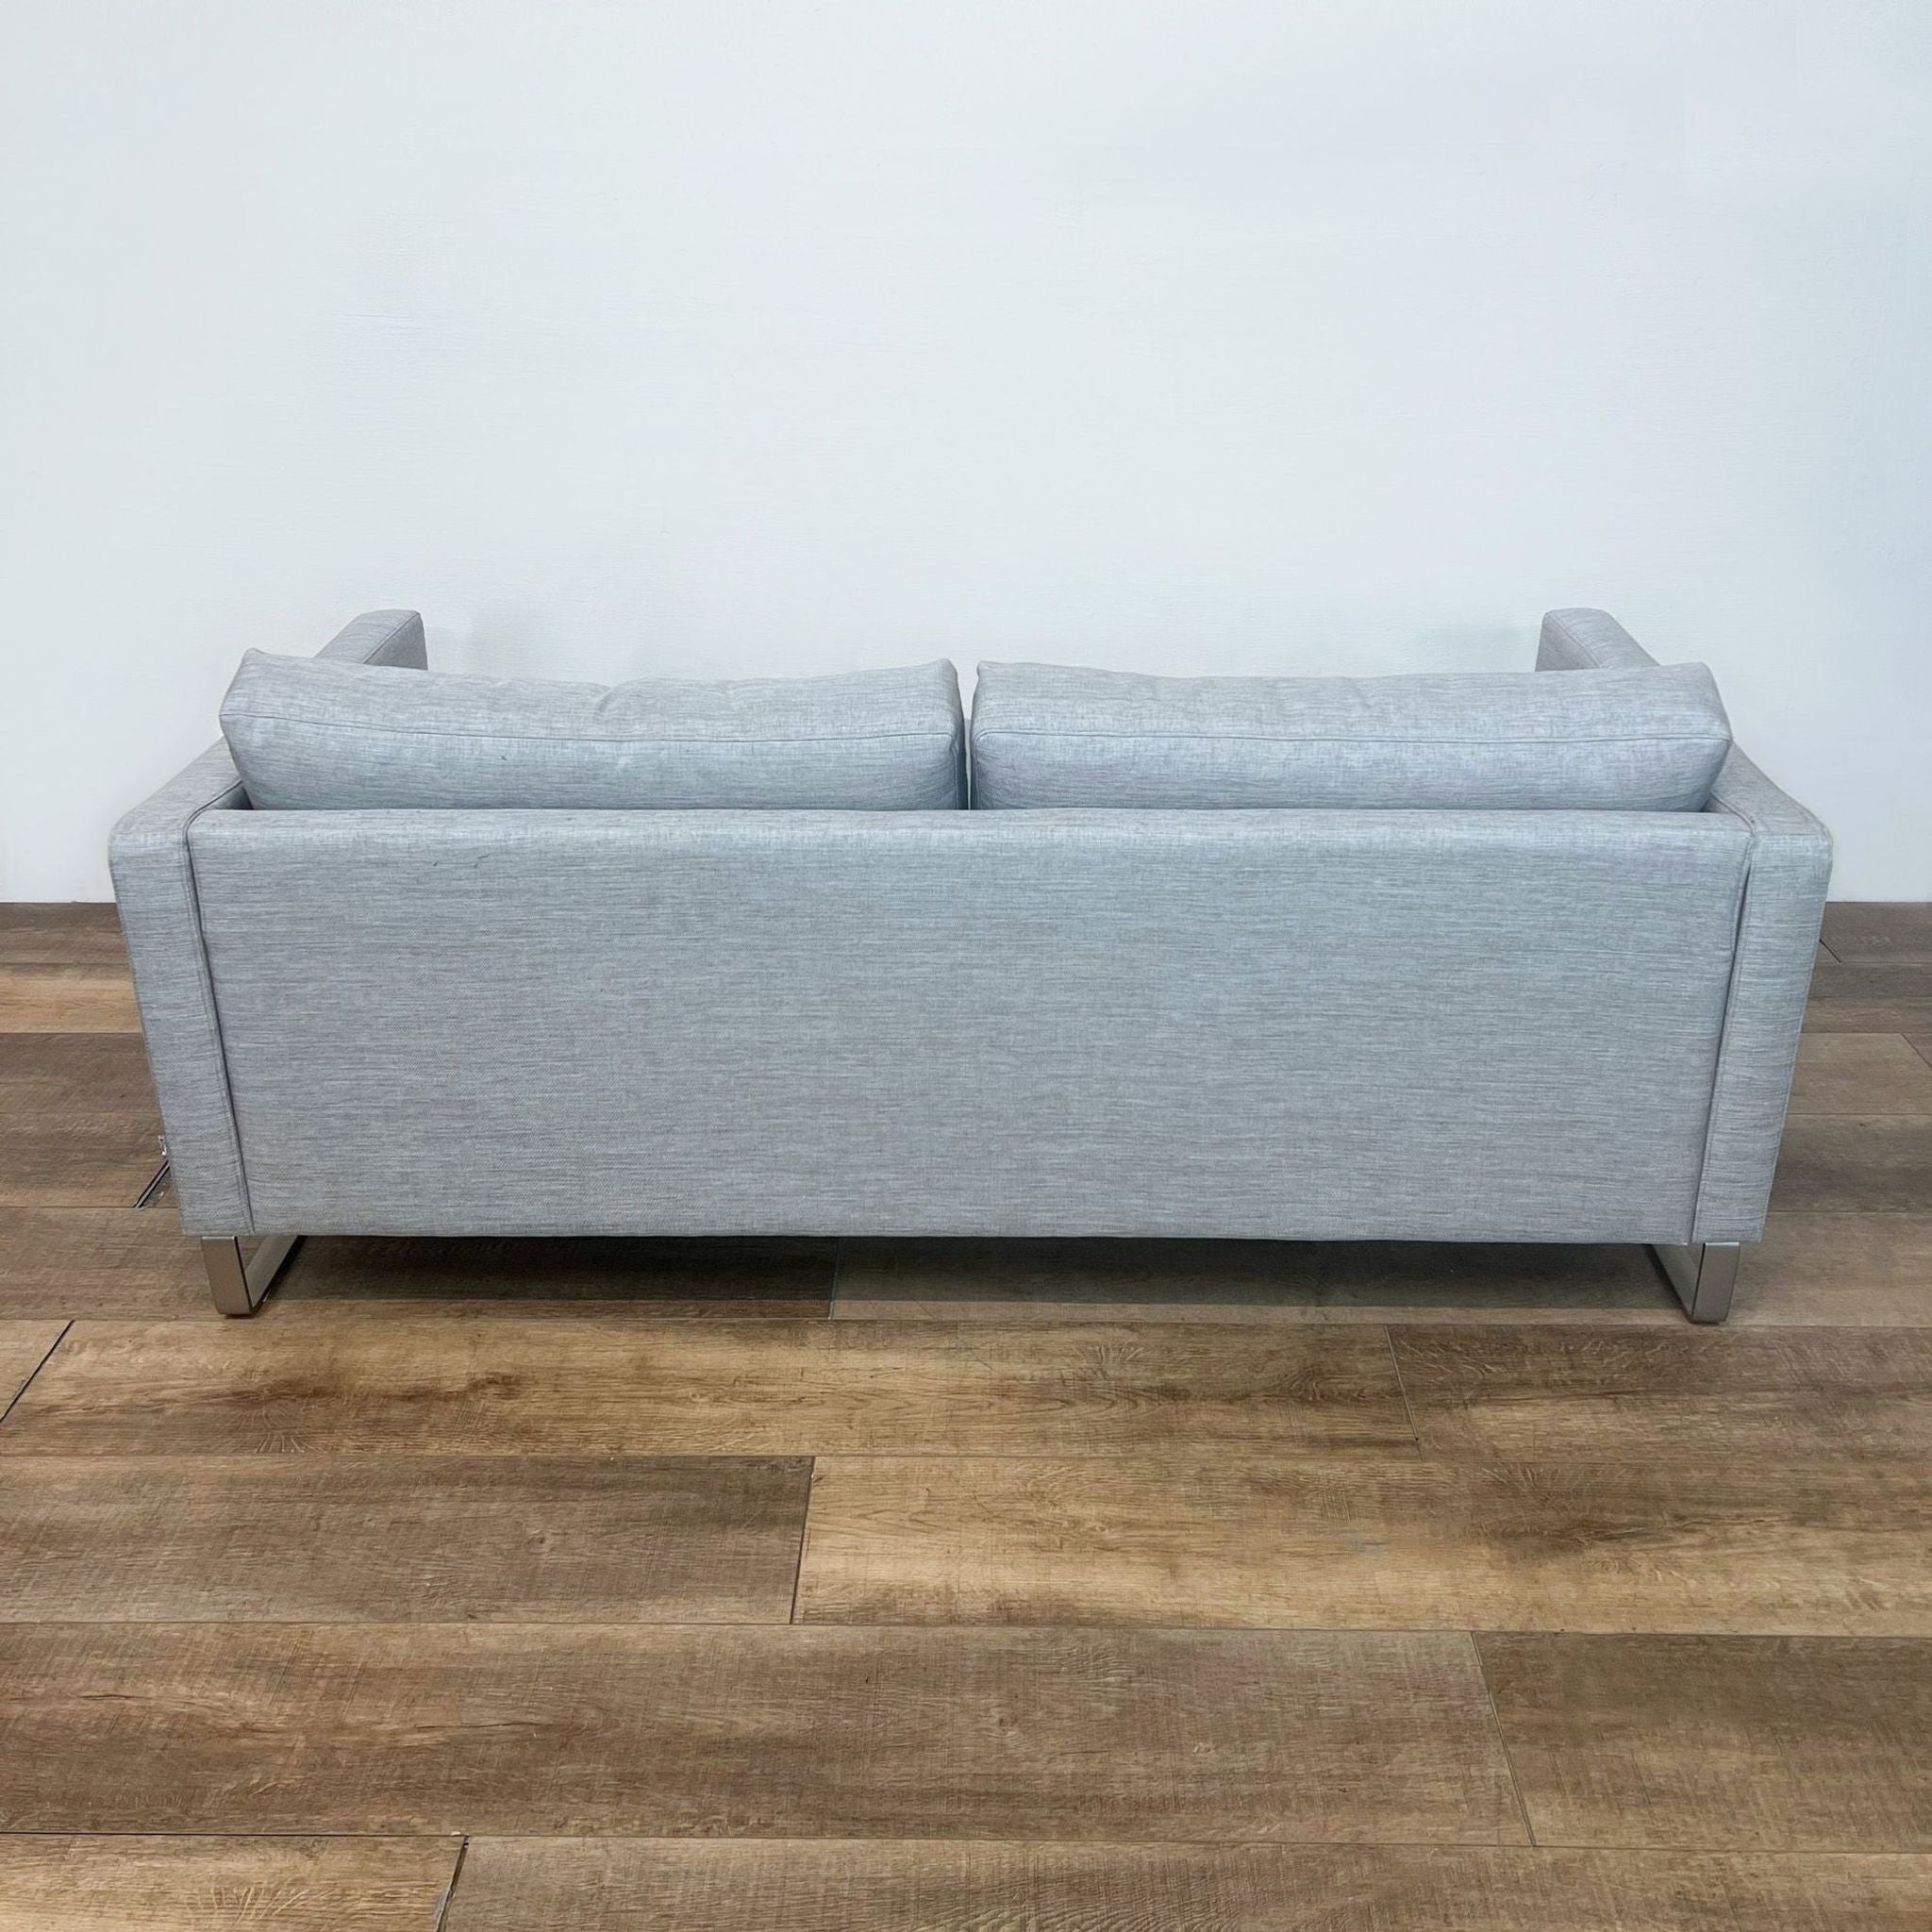 BoConcept Danish designer 3-seat gray sofa with clean lines, narrow arms, and metal frame legs on wooden floor.